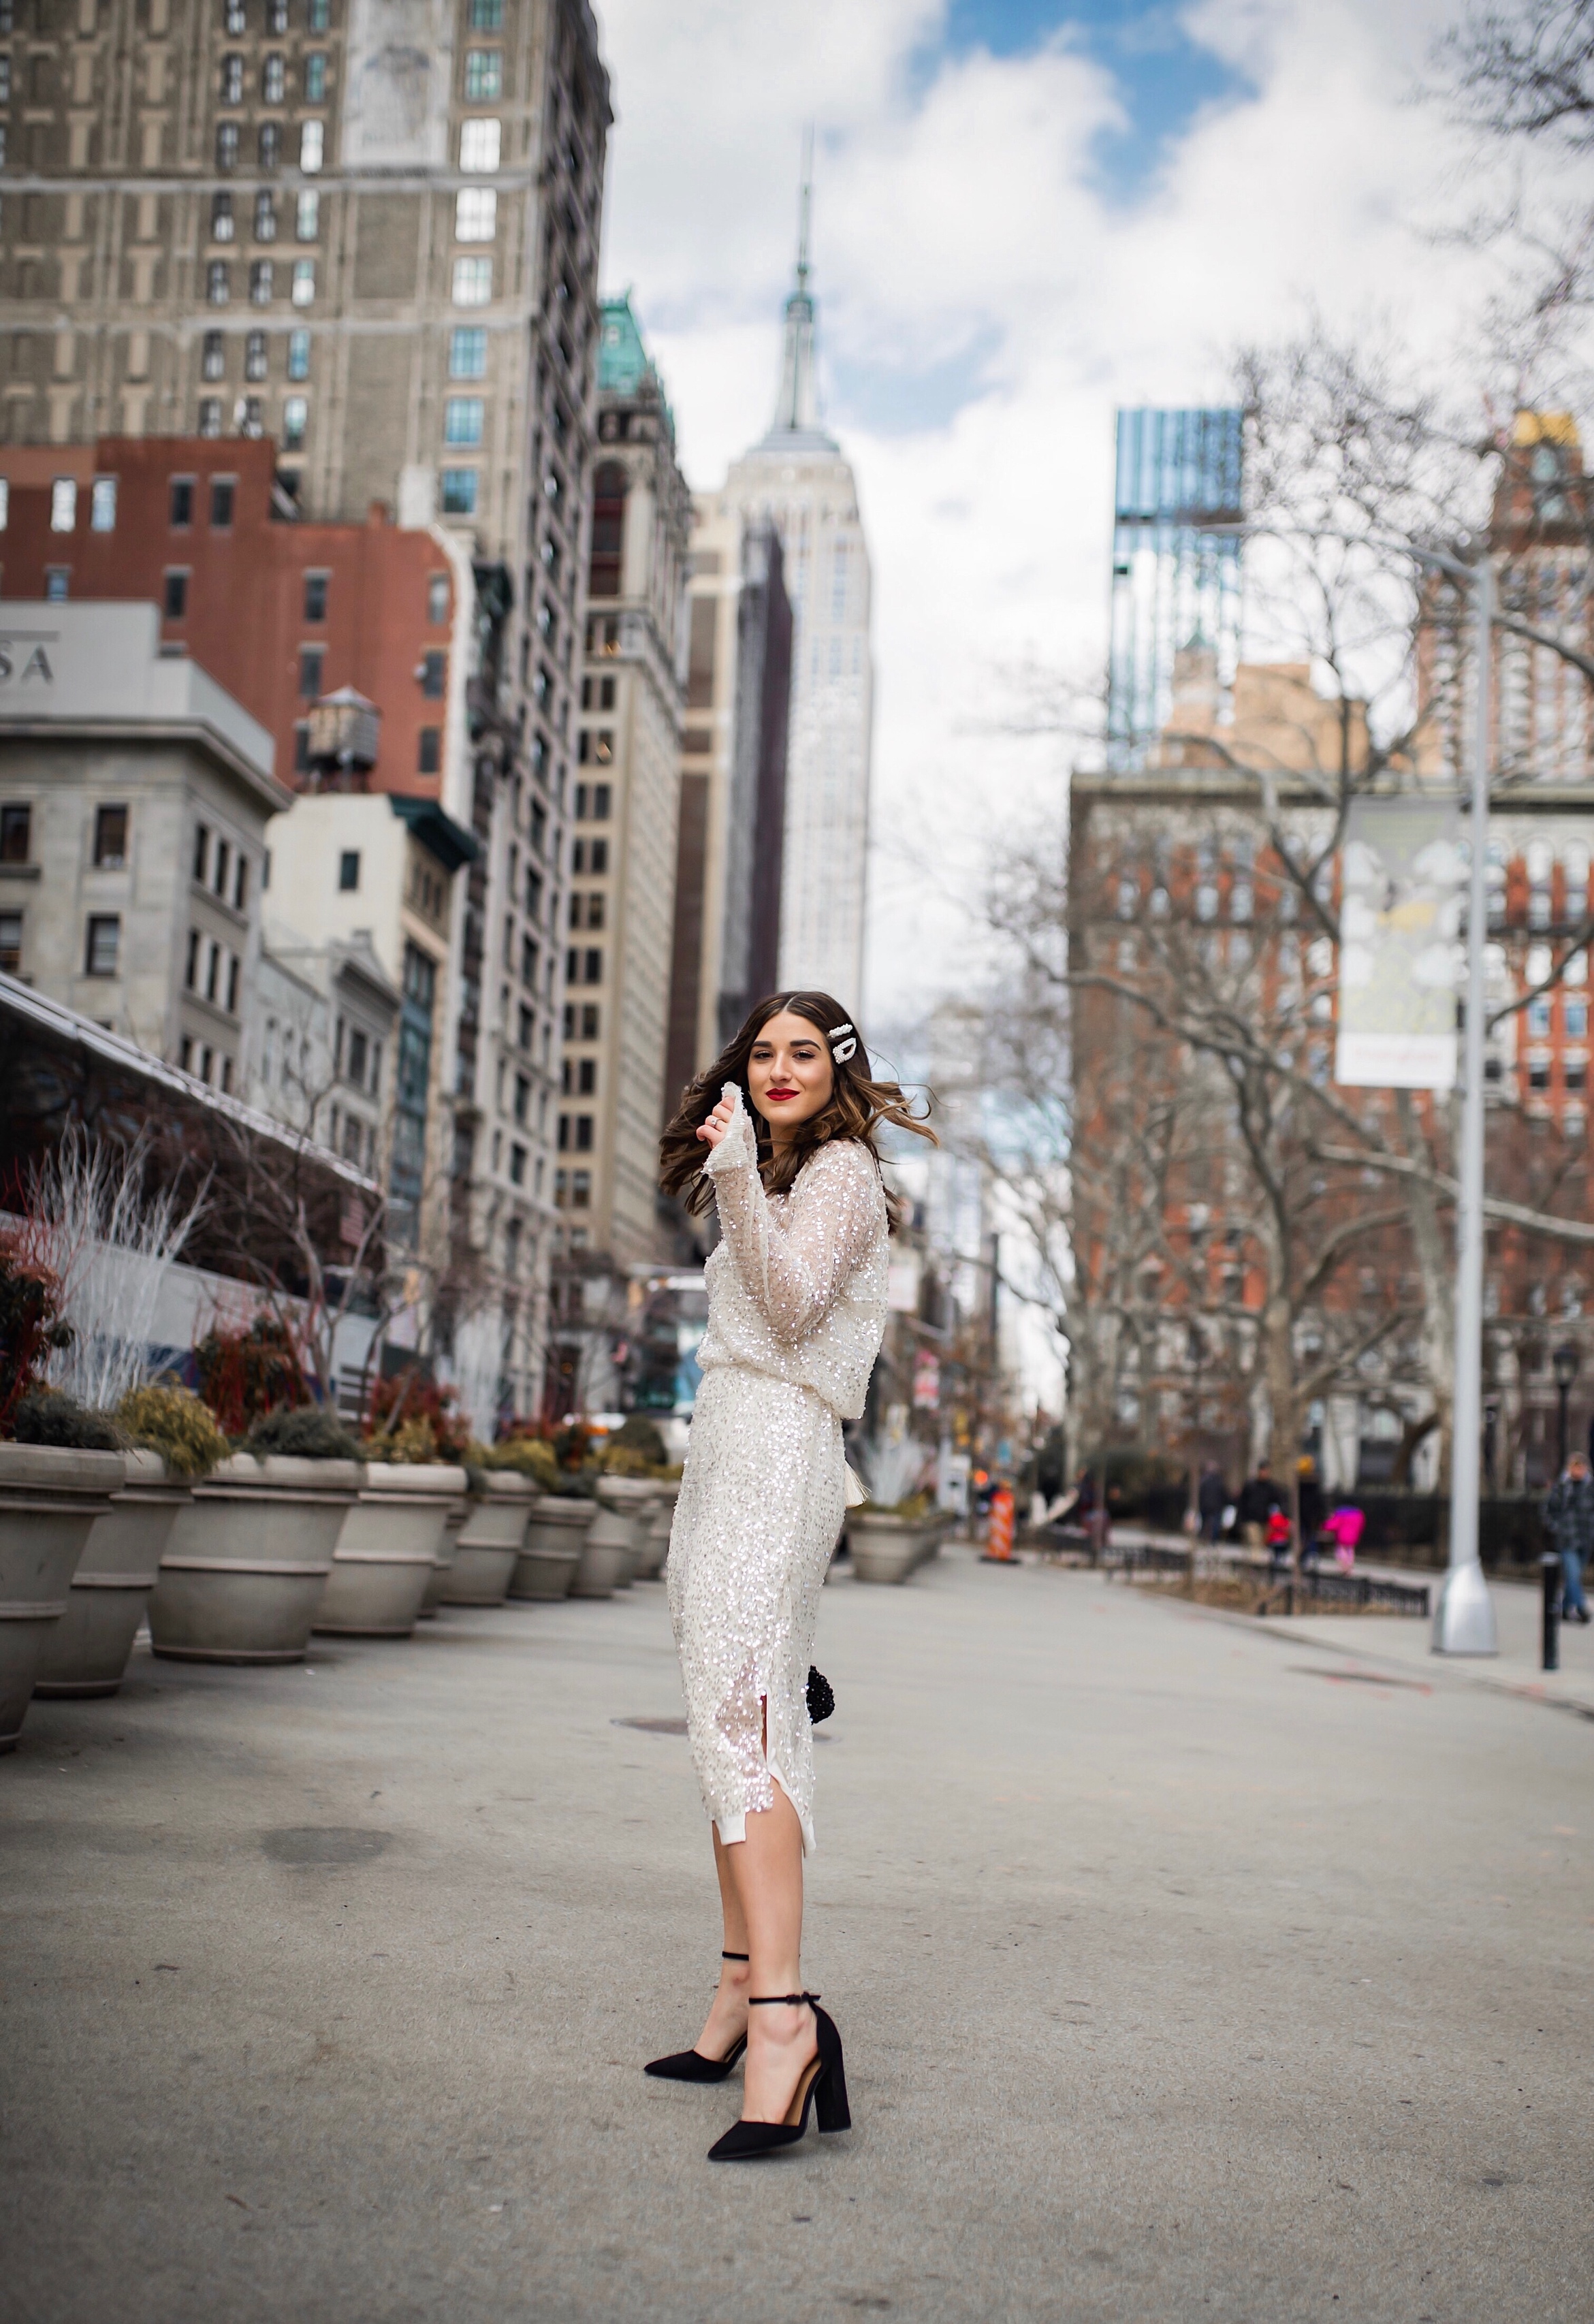 10 Ways To Be An Amazing Houseguest Sequined Midi Dress Black Heels Esther Santer Fashion Blog NYC Street Style Blogger Outfit OOTD Trendy Shopping Girl What How To Wear Beaded Clutch Pearl Hair Clips  Zara Asos Taxi Shot Photoshoot Inspo Bag Pretty.JPG